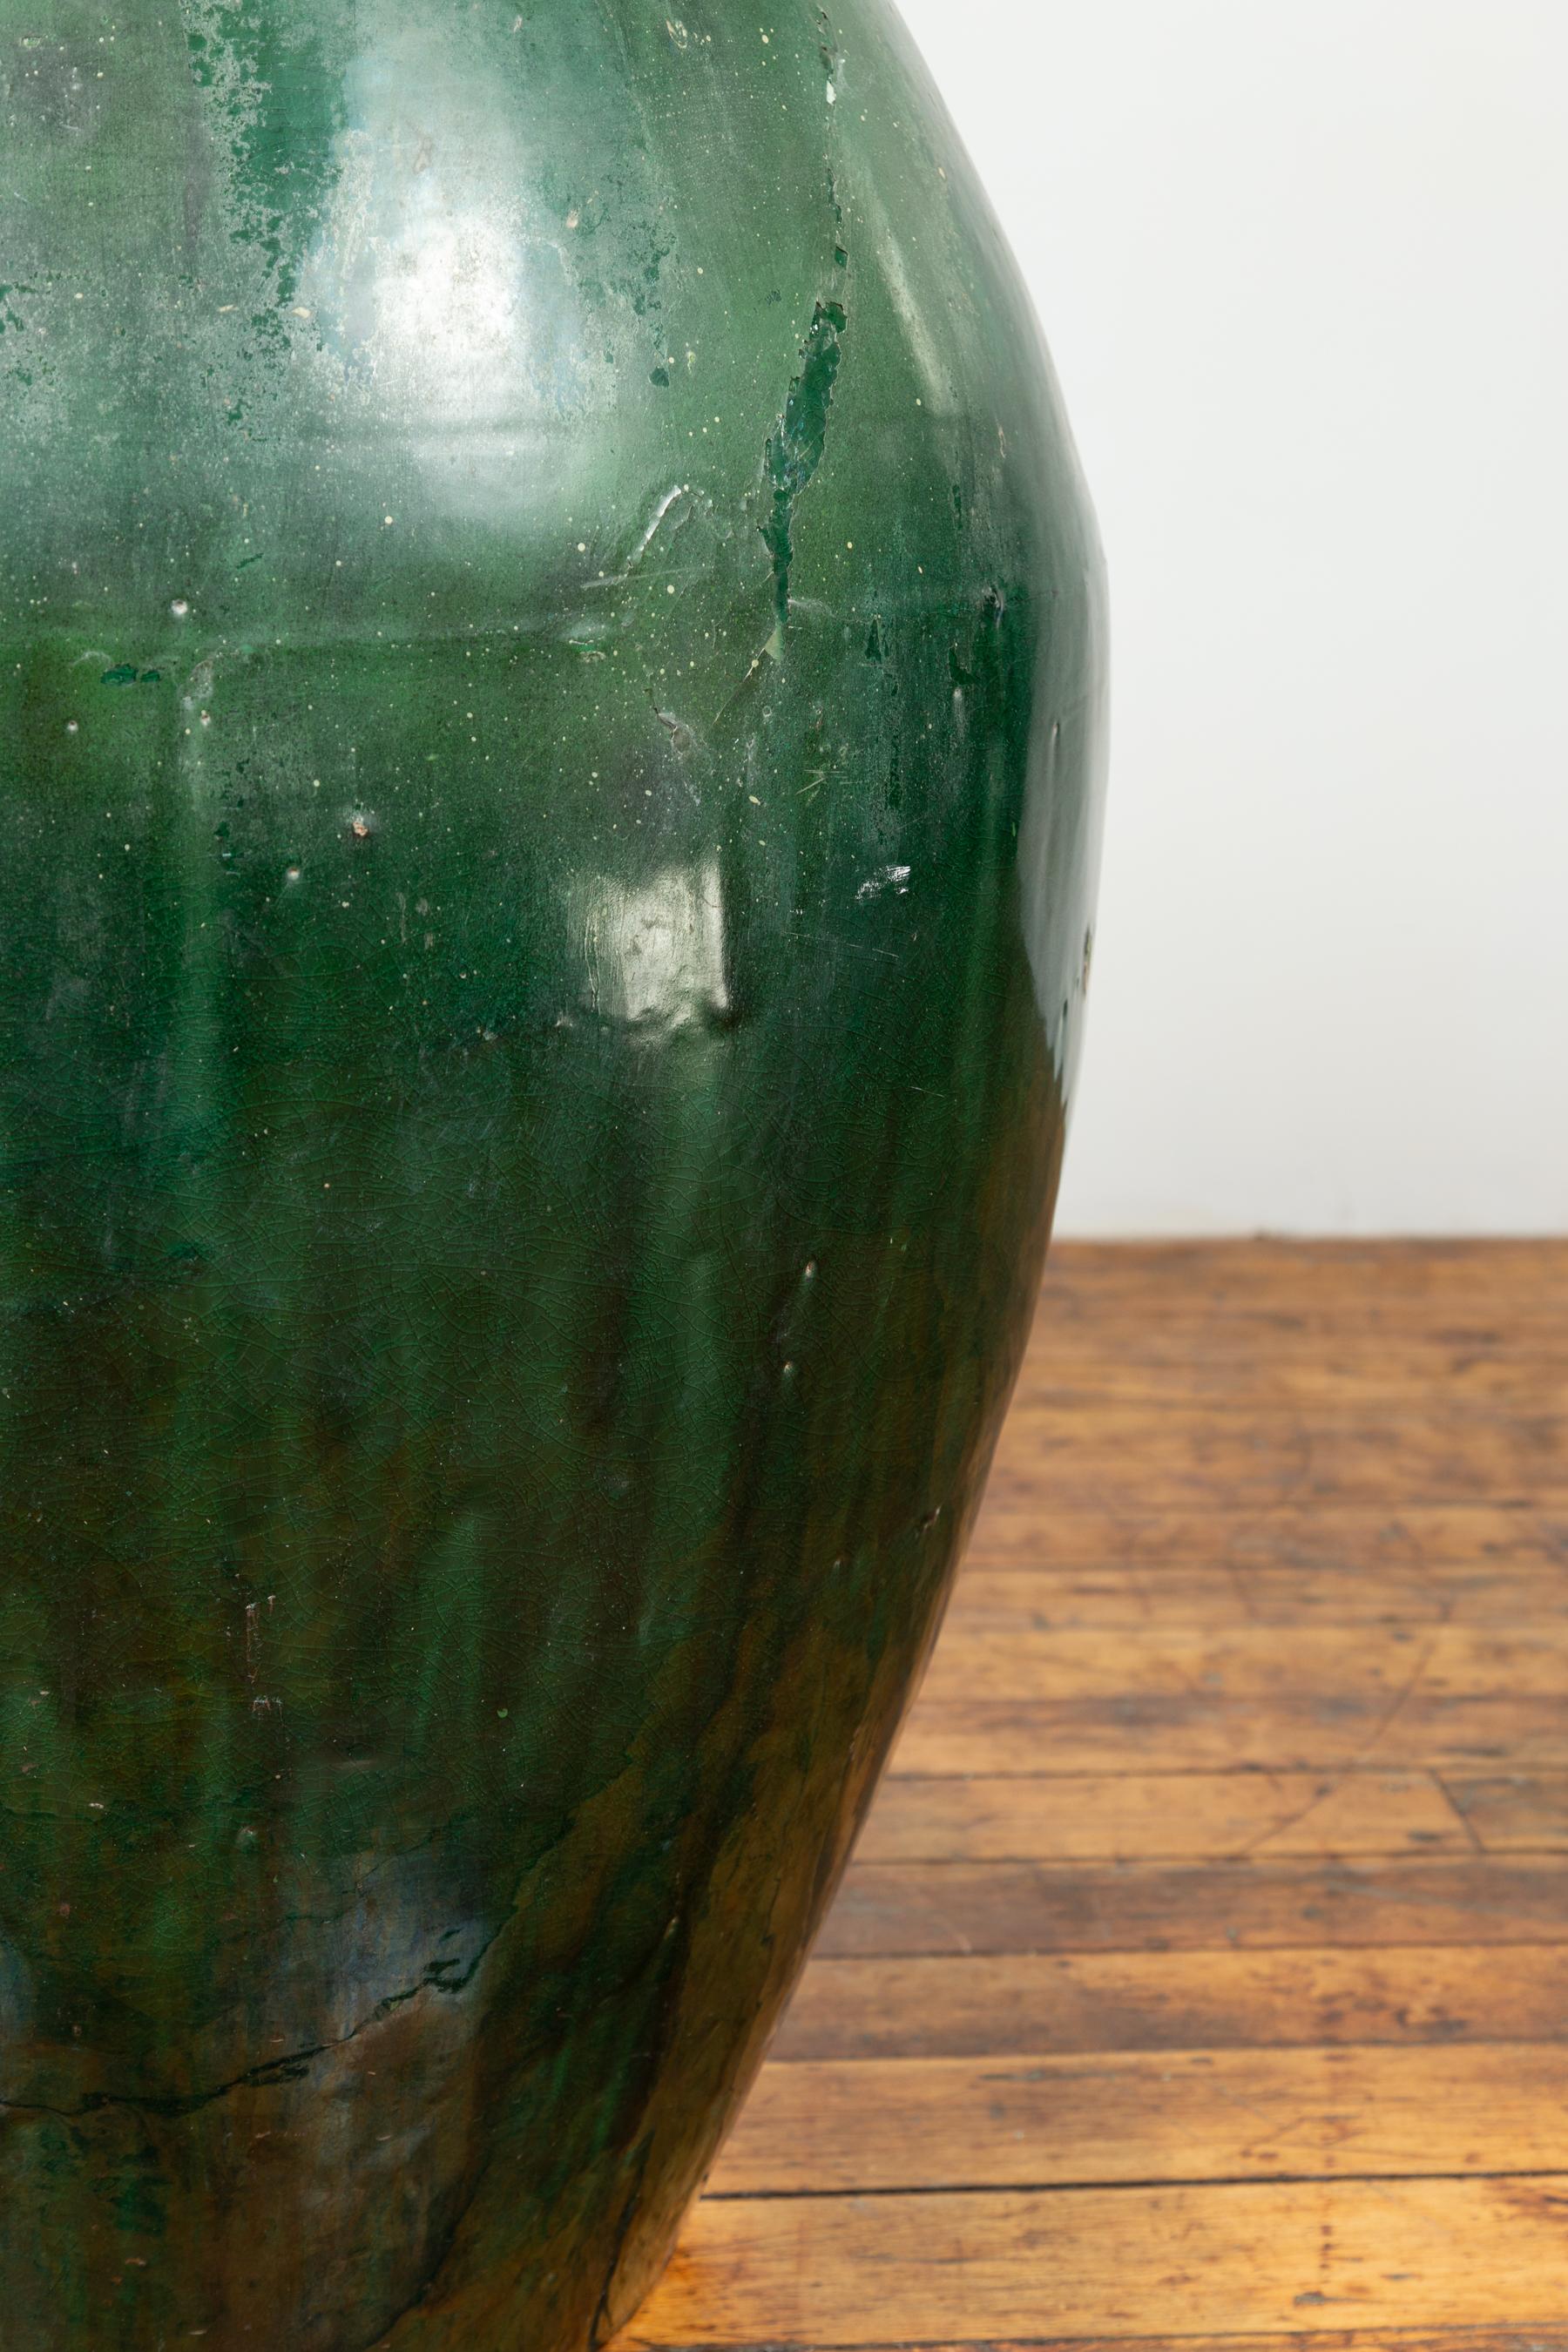 Asian Large Green Glazed Ceramic Jar from the Early 20th Century with Tapering Body